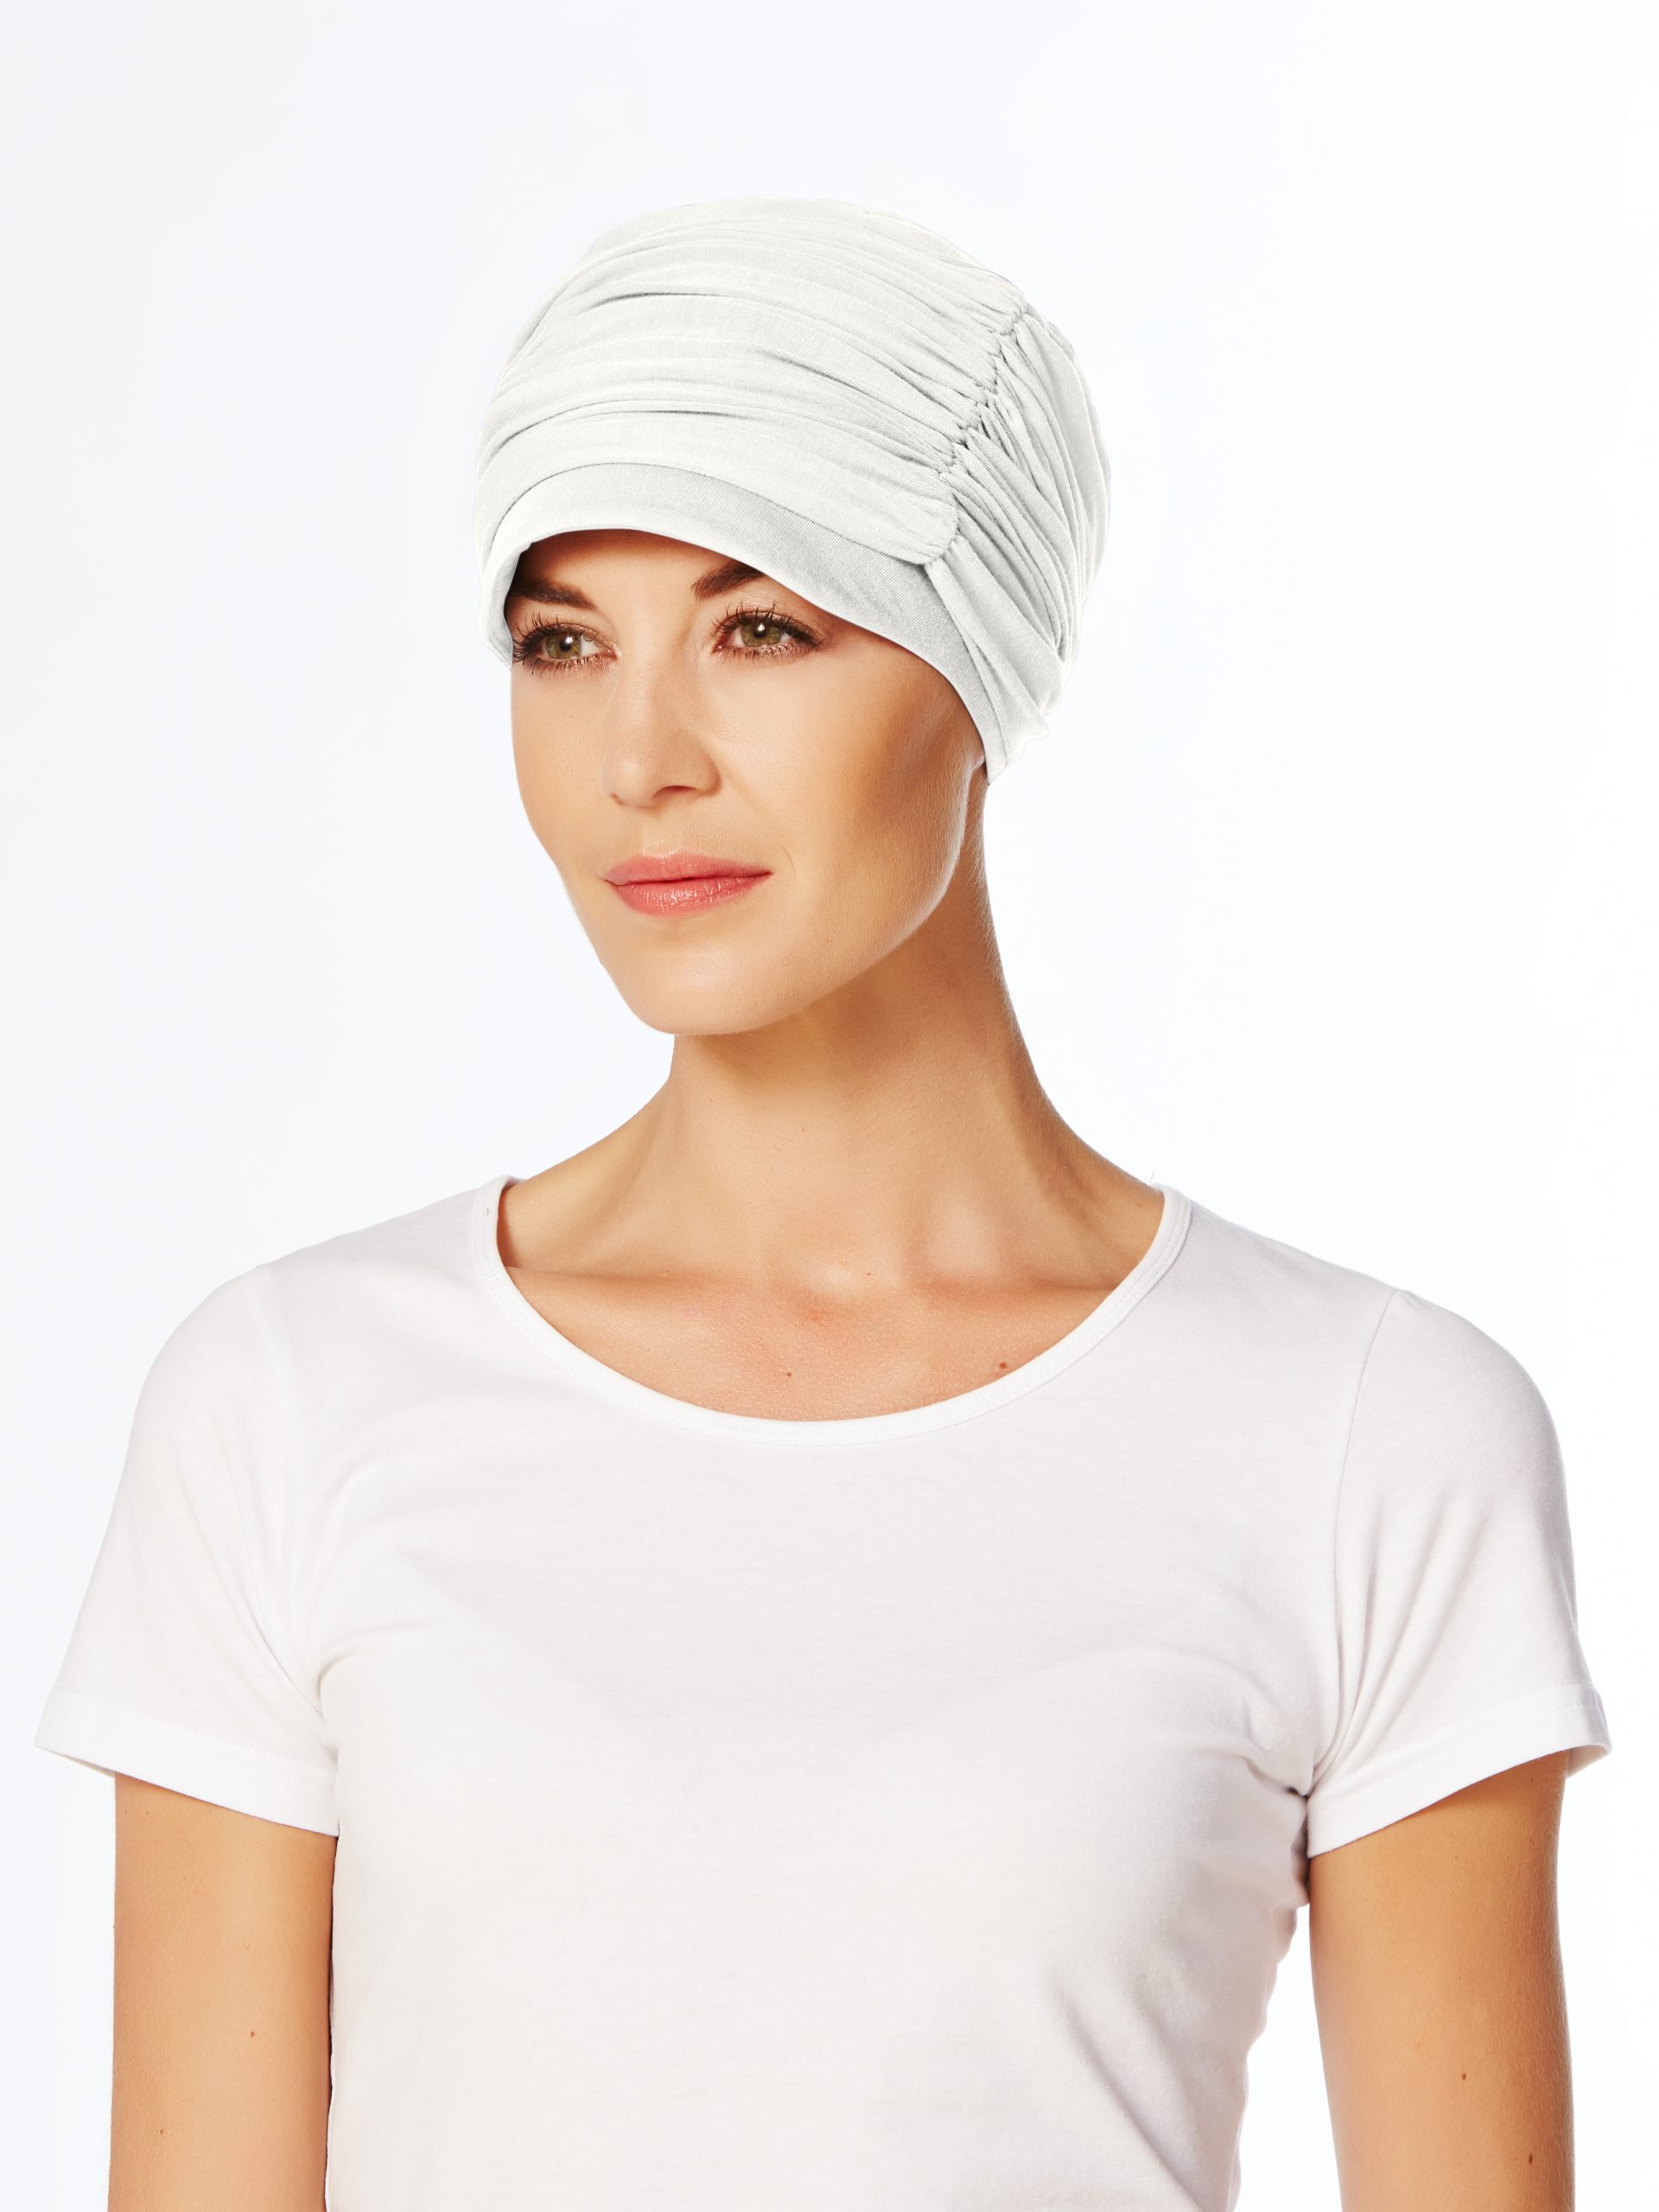 Azure Printed Turban with 95% Bamboo Viscose by Christine Headwear